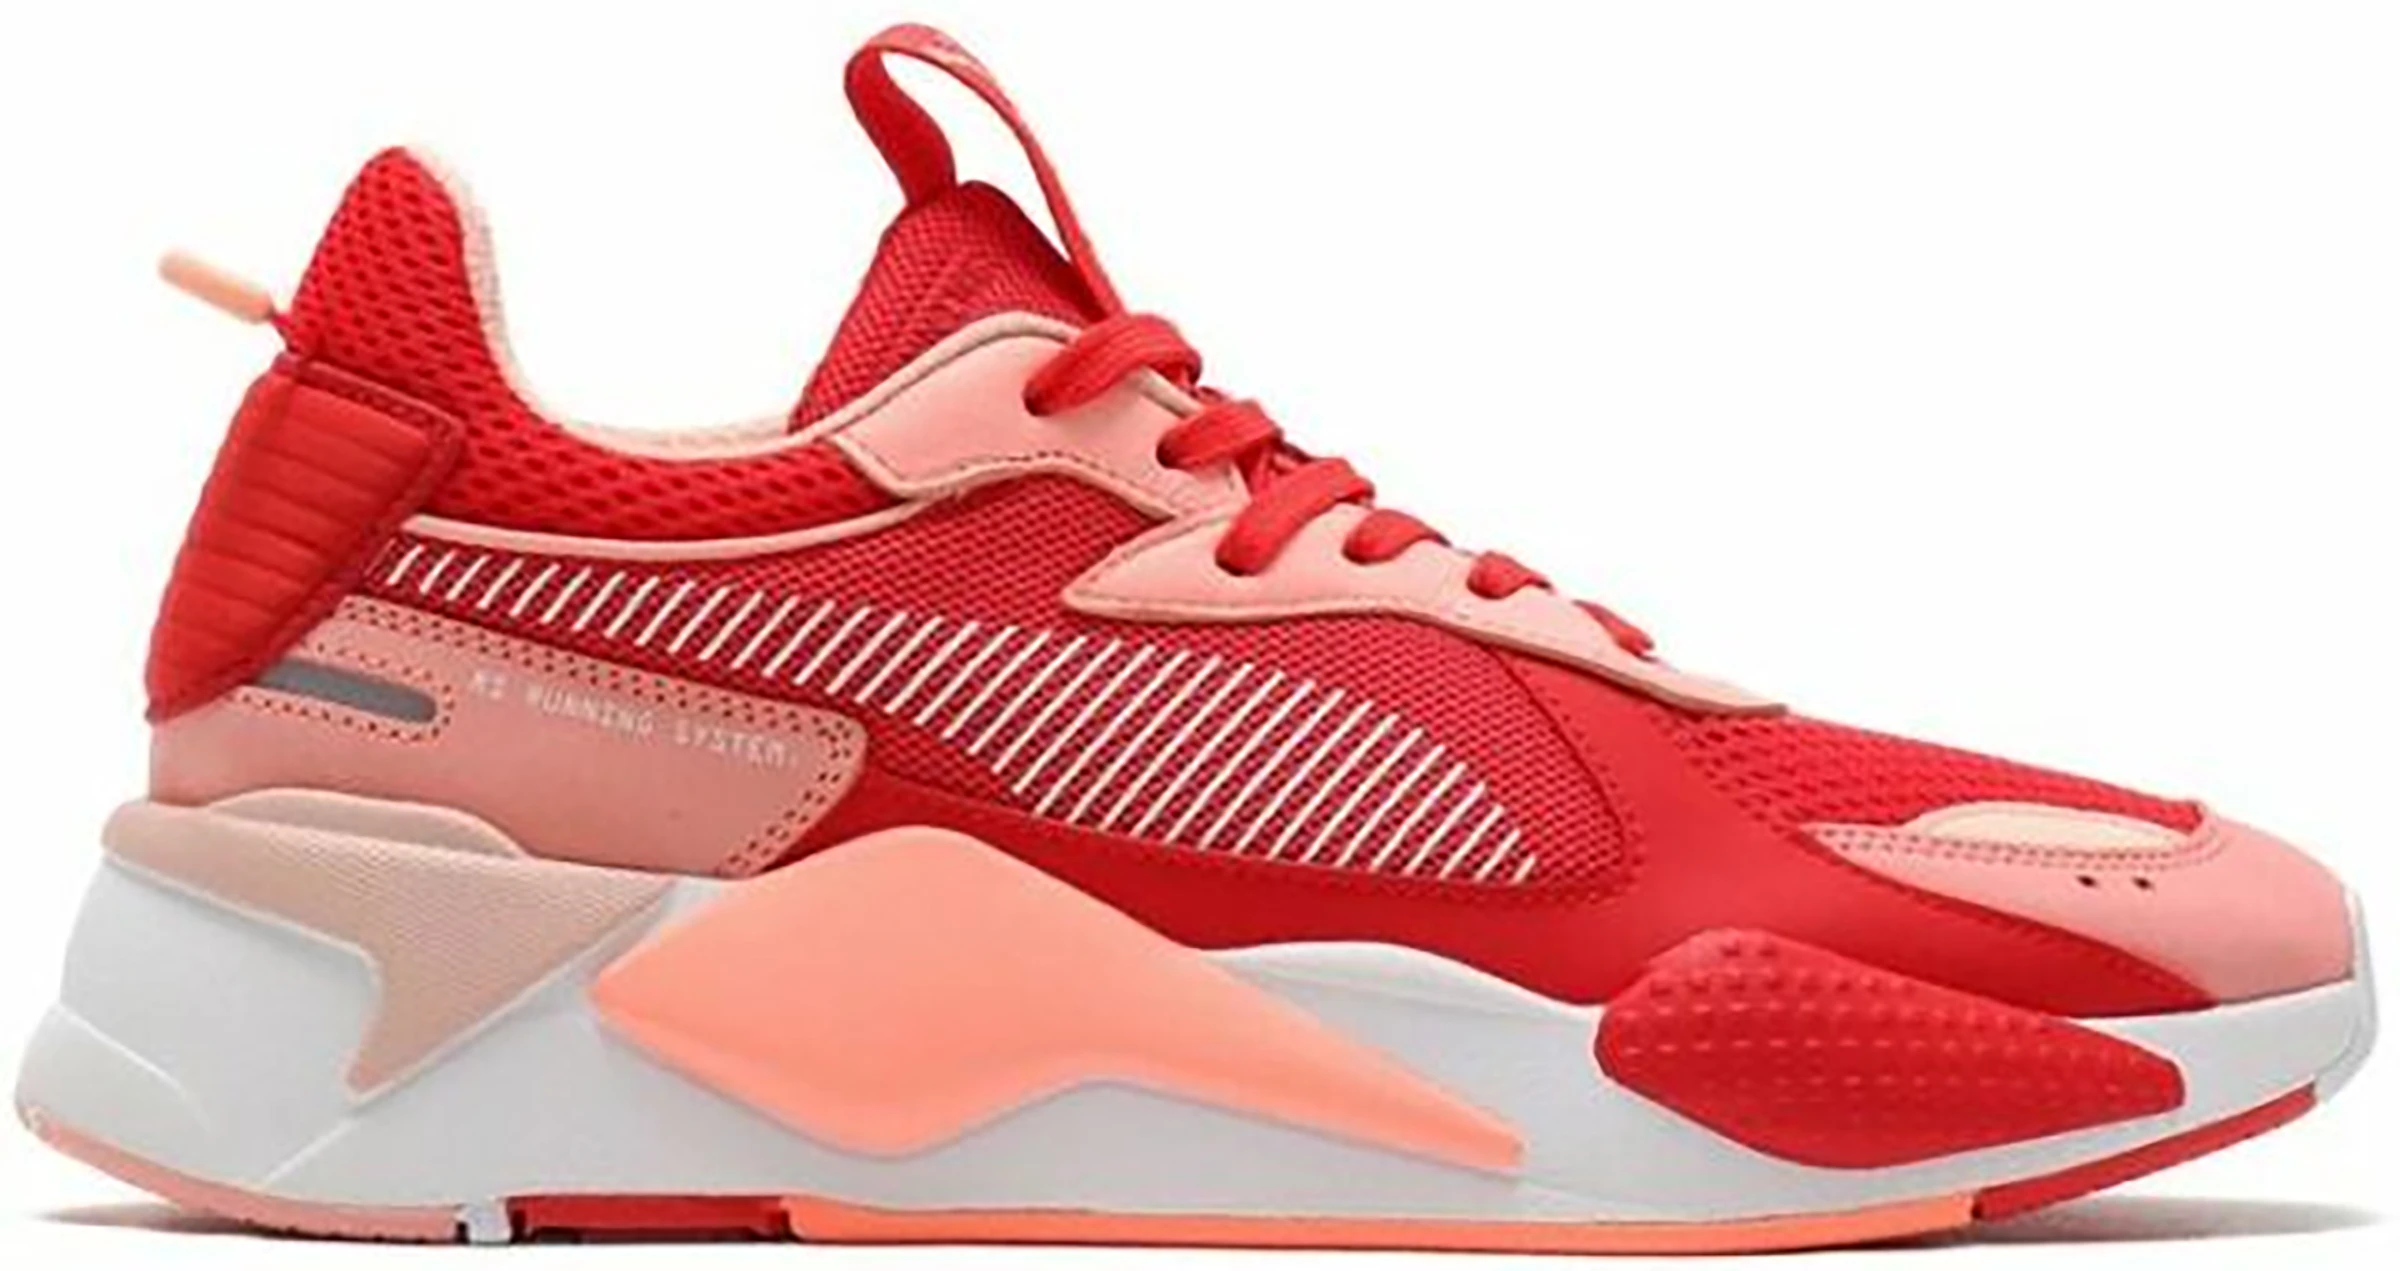 Buy Women'S Puma Rs-X Shoes & New Sneakers - Stockx